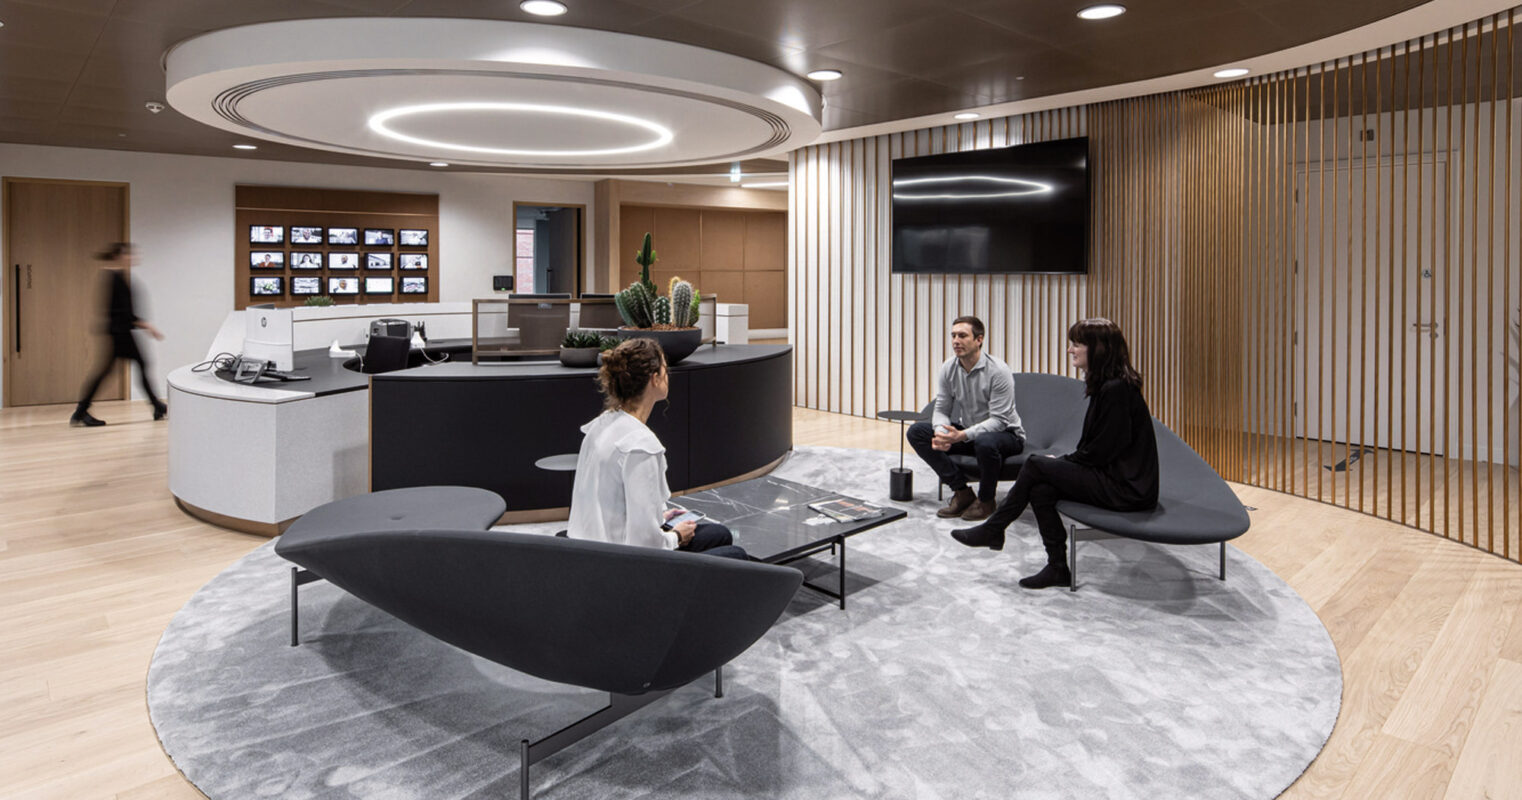 Modern office lounge featuring curved design elements, casual black seating, and a central gray area rug. Wooden slats flank one side, enhancing the room's warm yet sophisticated aesthetic. A circular reception desk sits in the back with ambient lighting overhead.